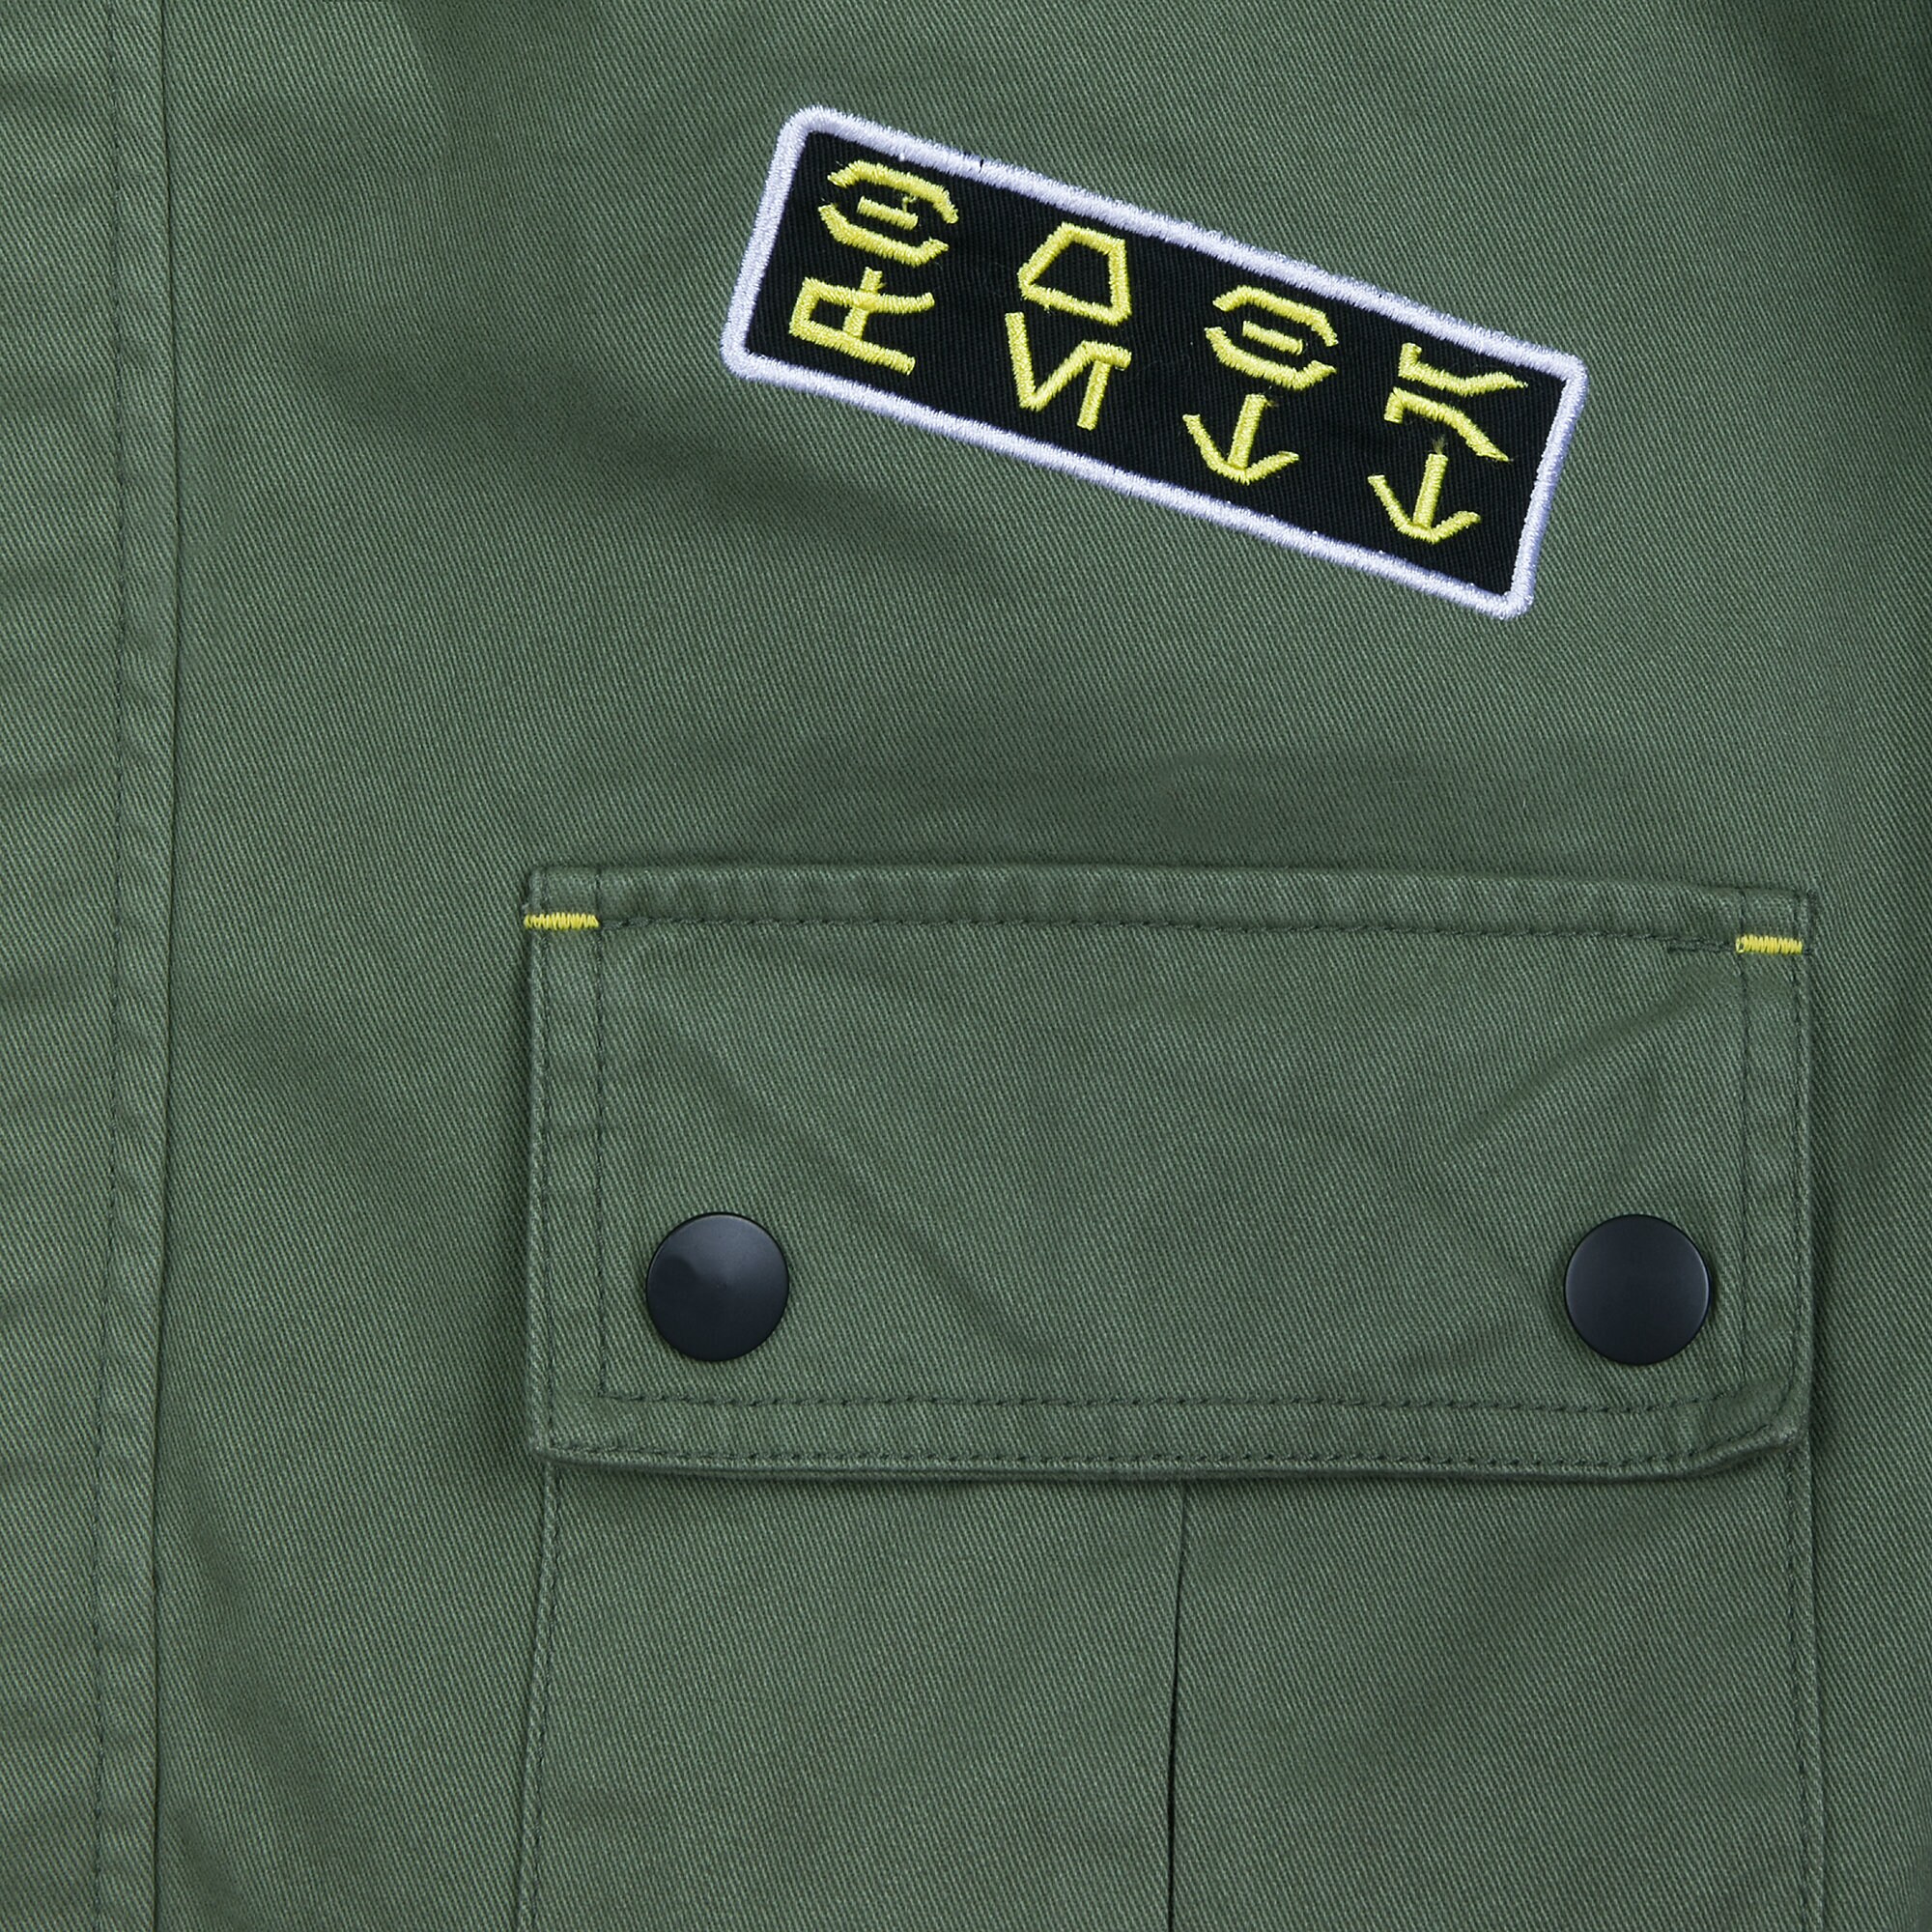 Boba Fett Military Jacket for Adults - Star Wars